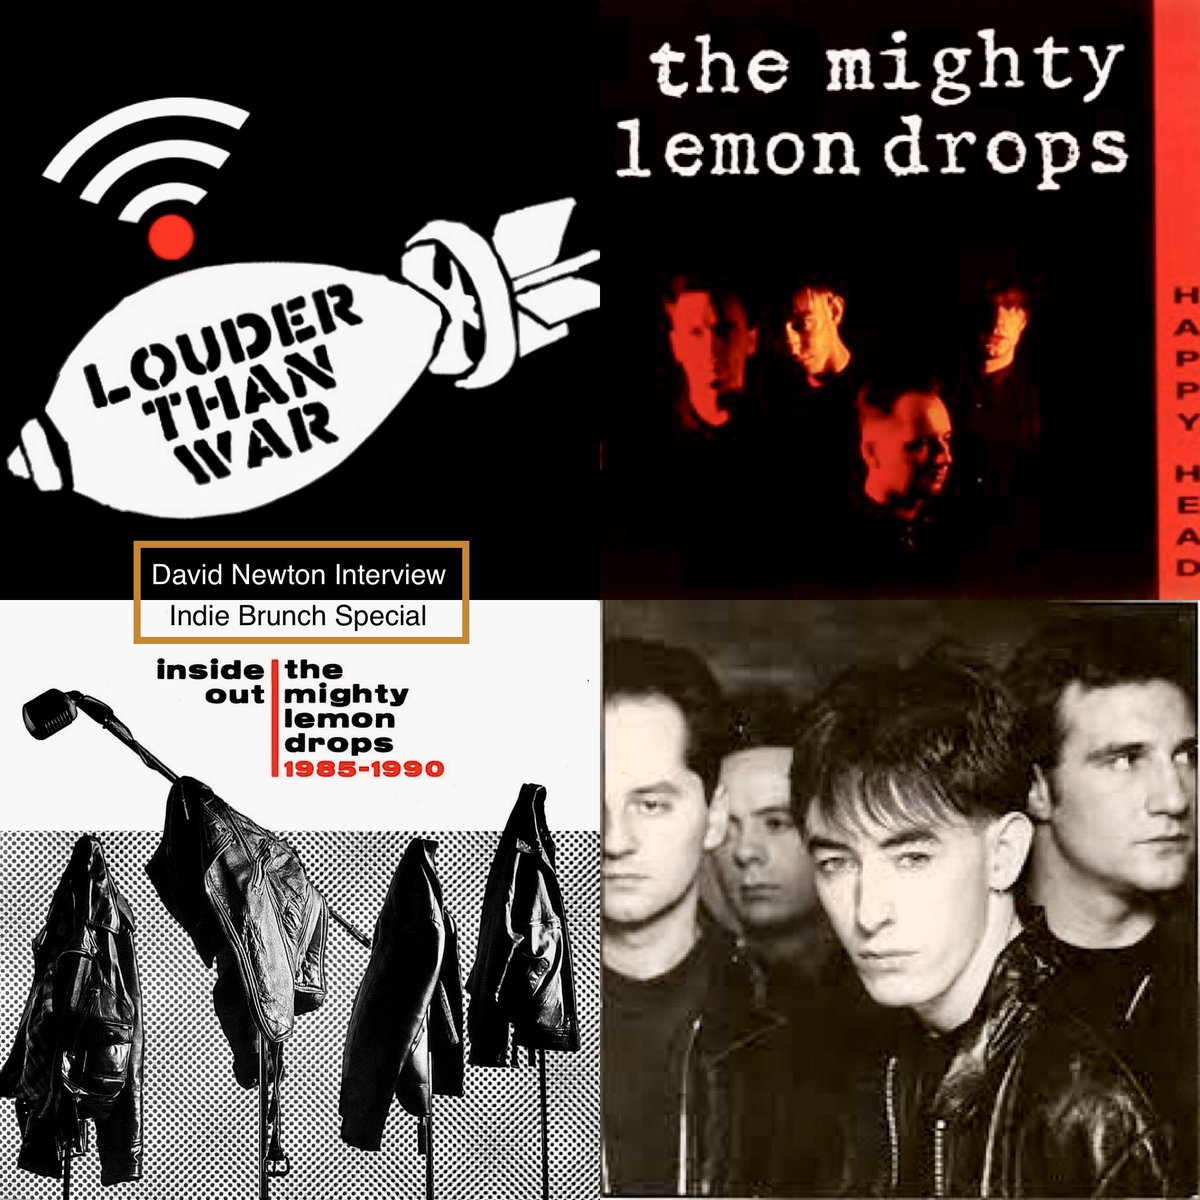 Coming soon on @louderthanwar Feature length interviews with Indie Legends Sean Dickson (Soup Dragons) & David Newton (Mighty Lemon Drops) @HifiSean @theemightyangel @CherryRedGroup @PrecRecs @LNFGlasgow #soupdragons #mightylemondrops #c86 Final part of trilogy to be revealed!